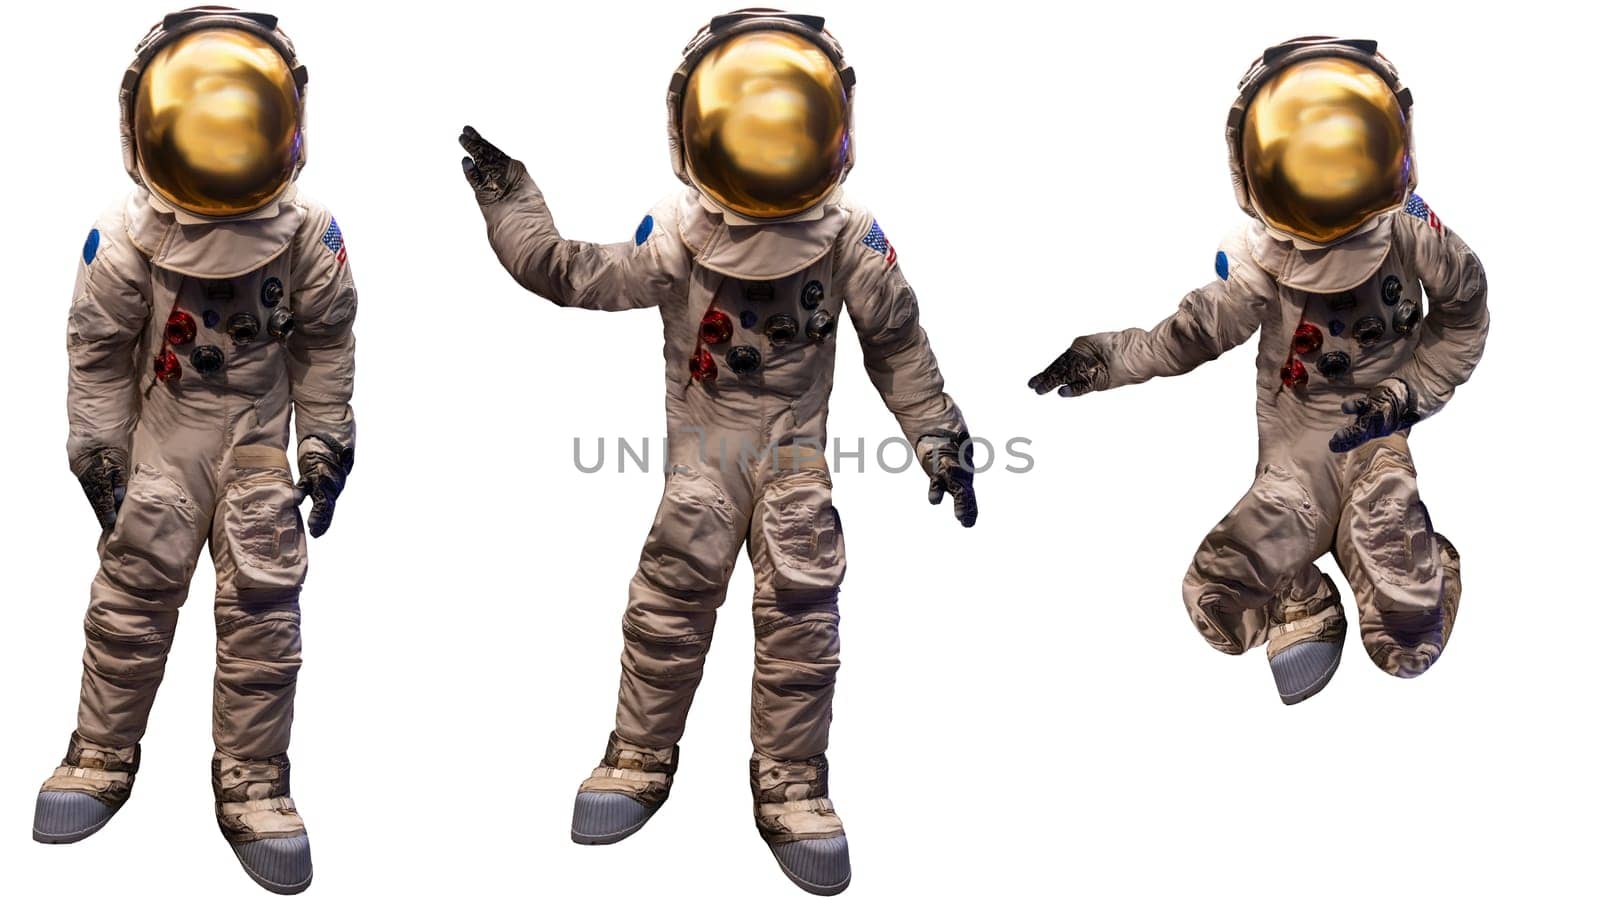 Space suit astronaut isolated on white background with clipping path. Space is fun concept. 3 poses. No NASA logo. Authentic retro suit. High quality photo